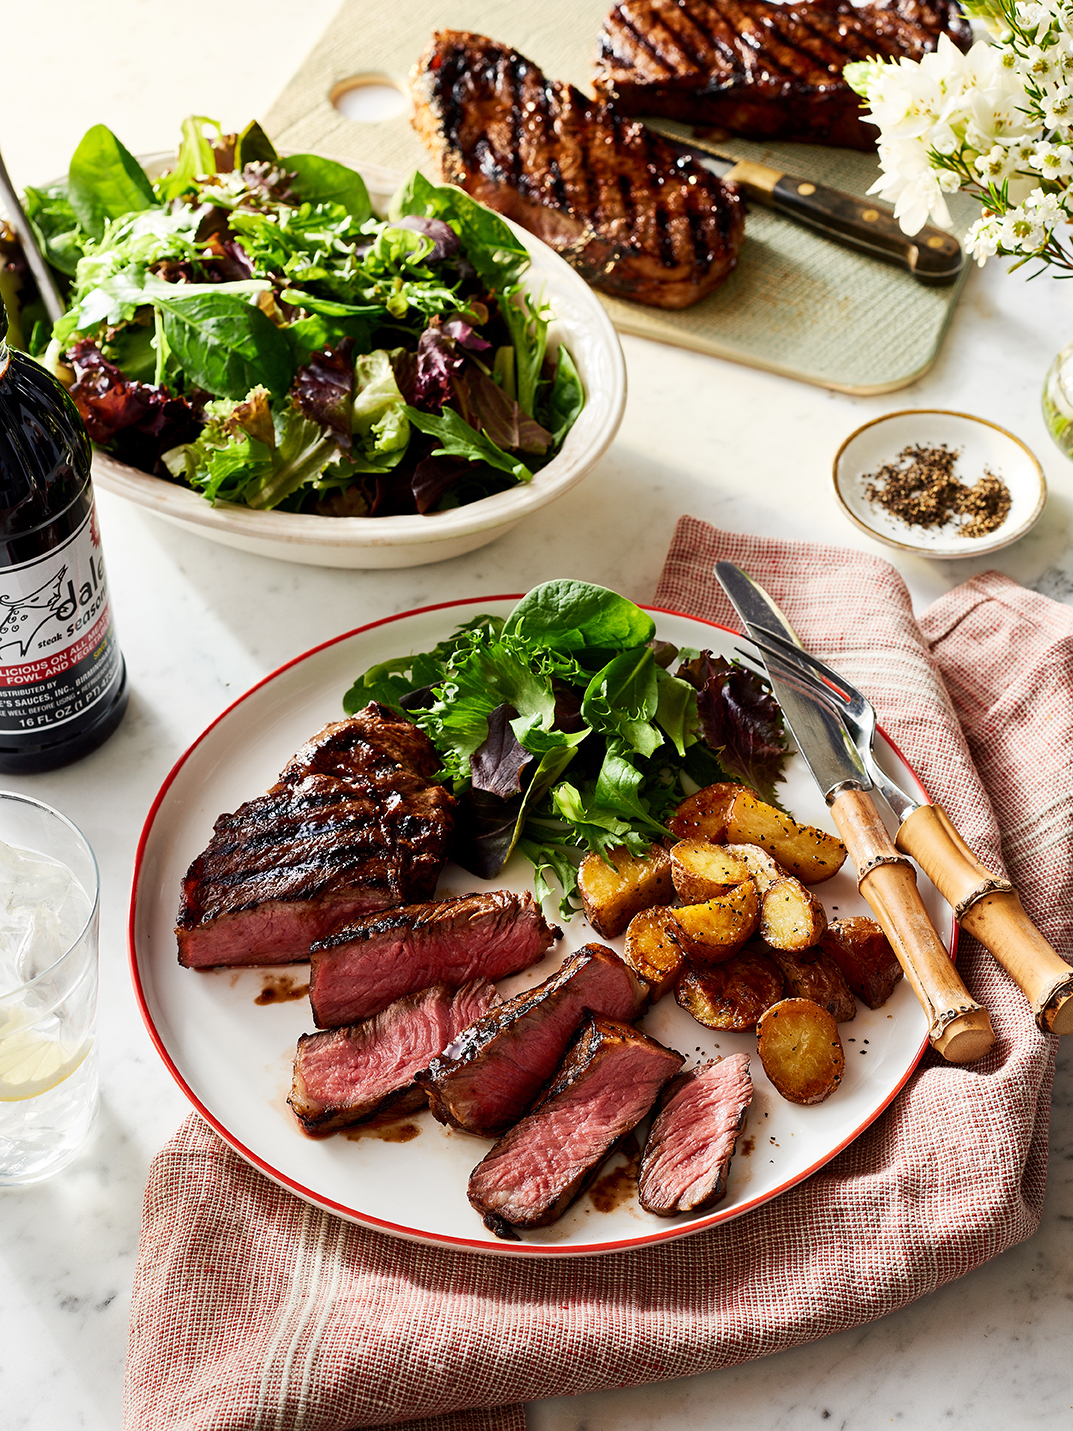 Ultimate Grilled NY Strip Steak with Herb Butter - Dale's Grilled NY Steak